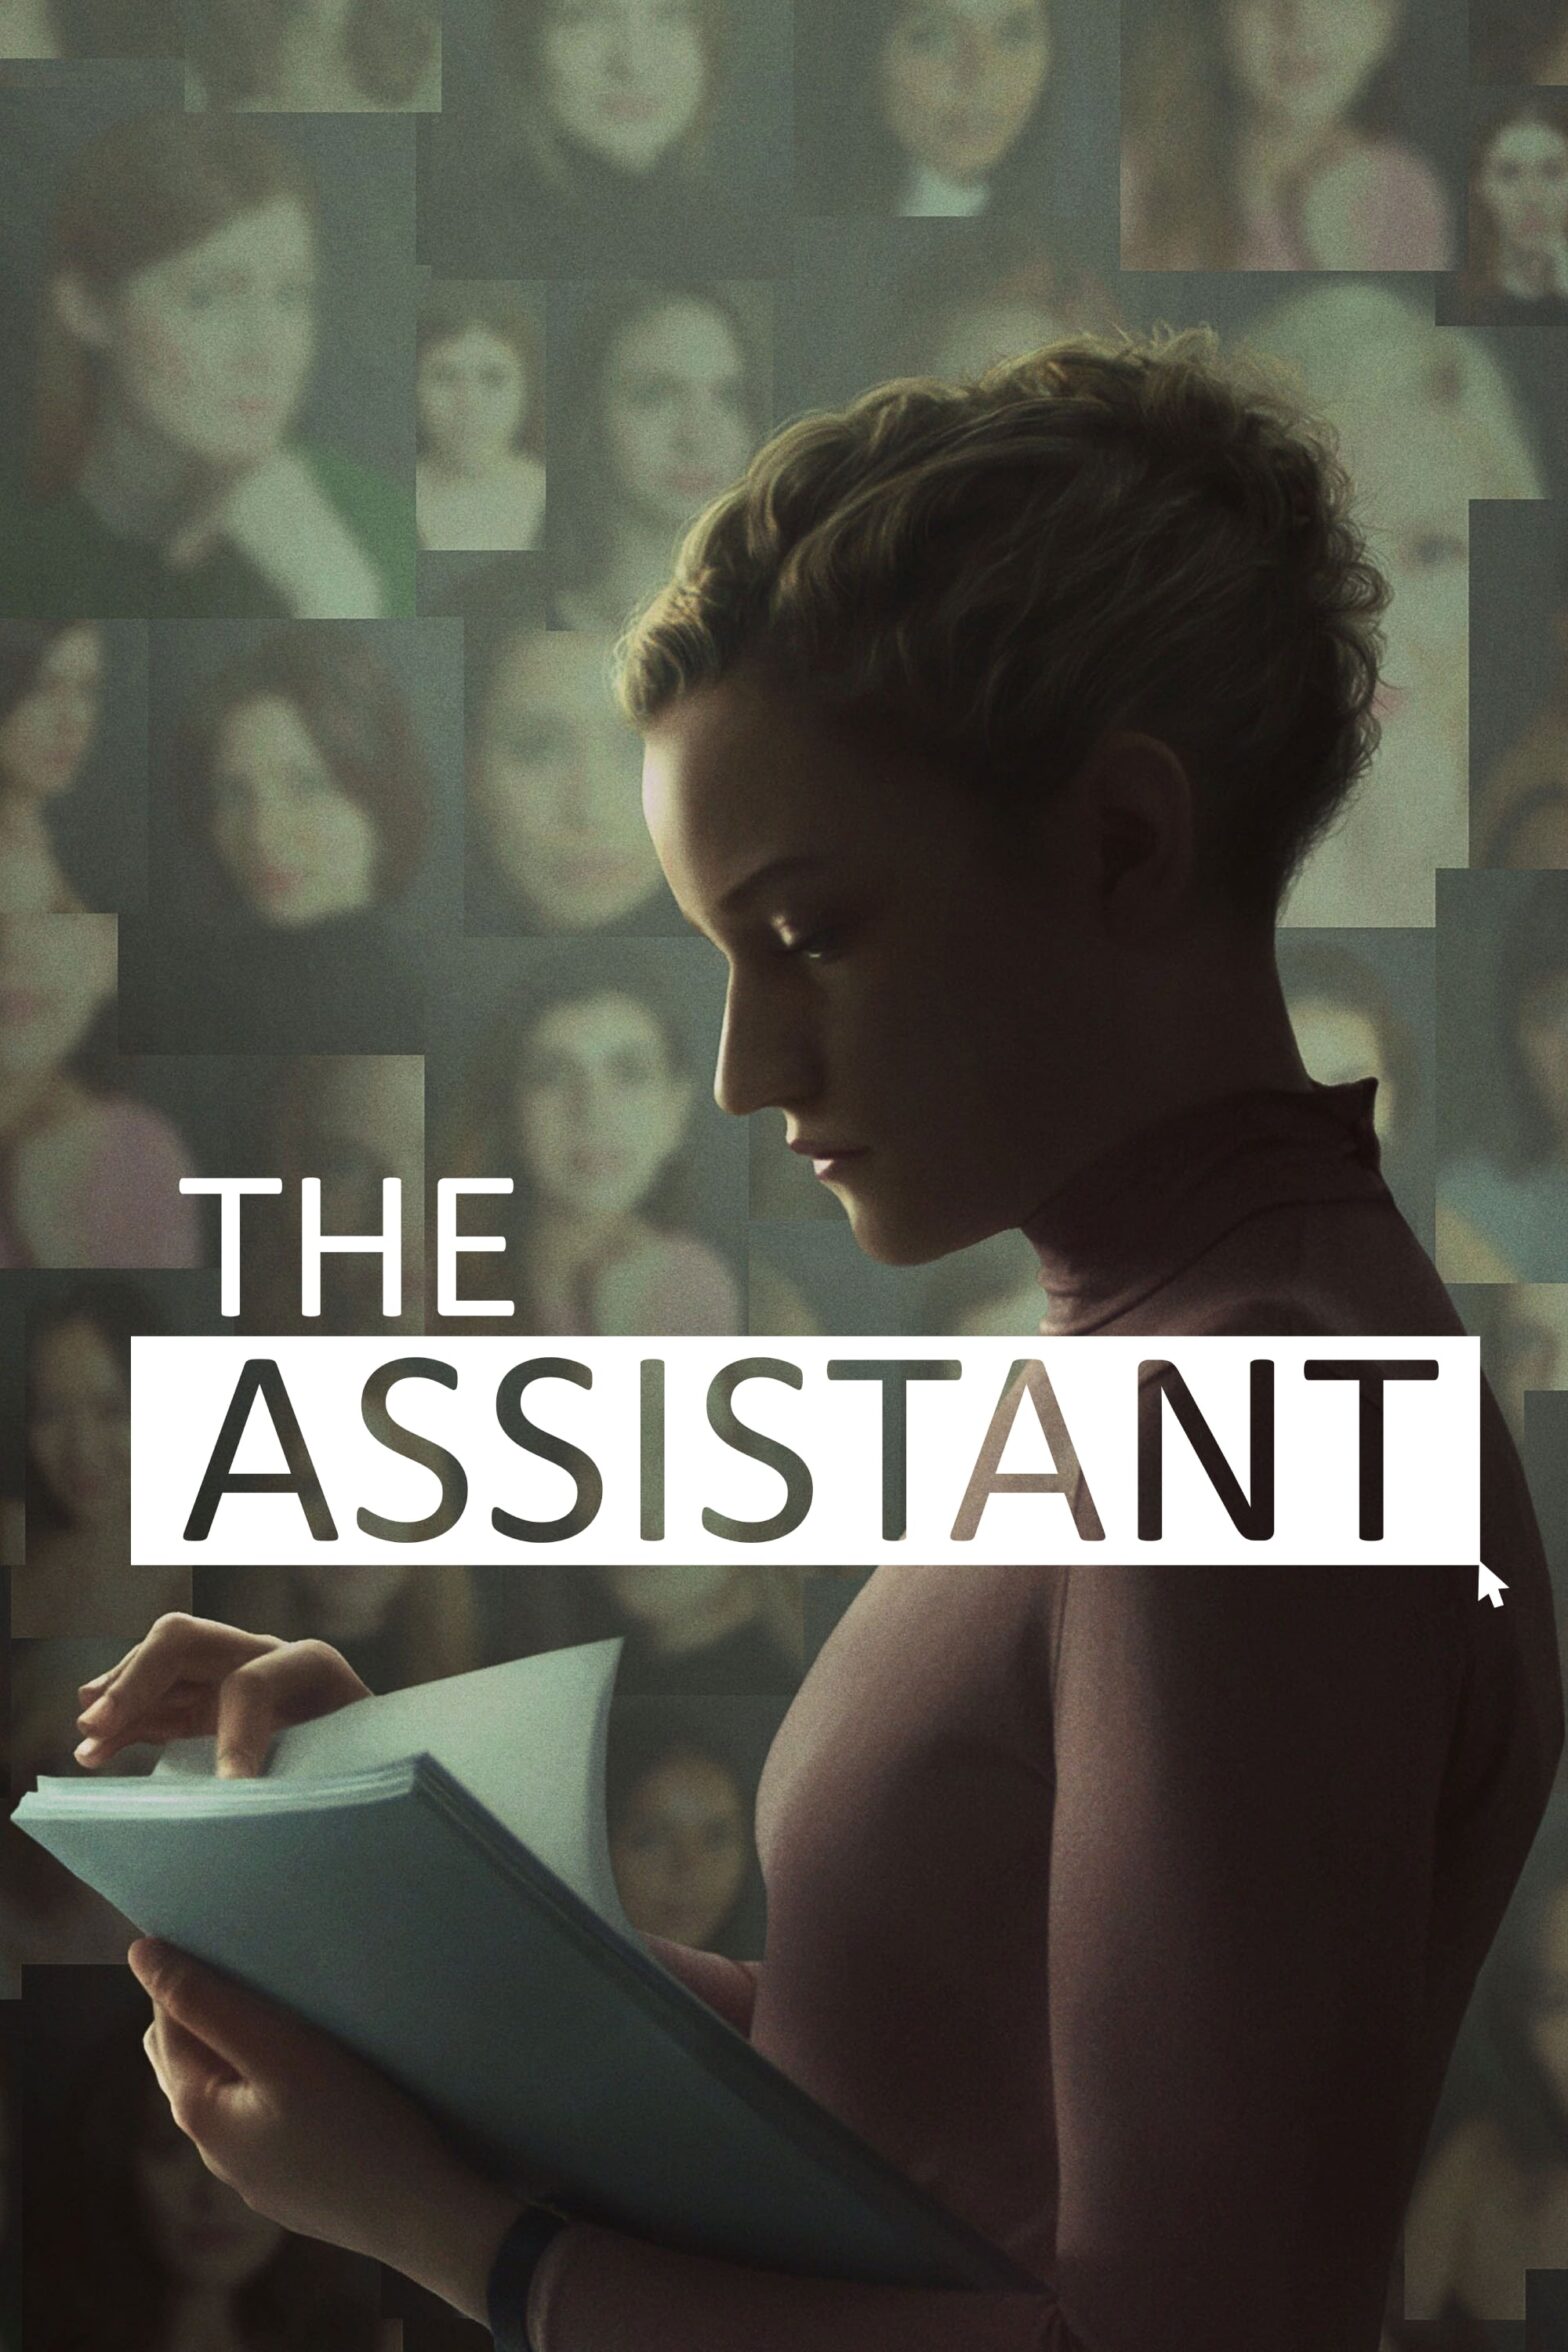 Poster for the movie "The Assistant"